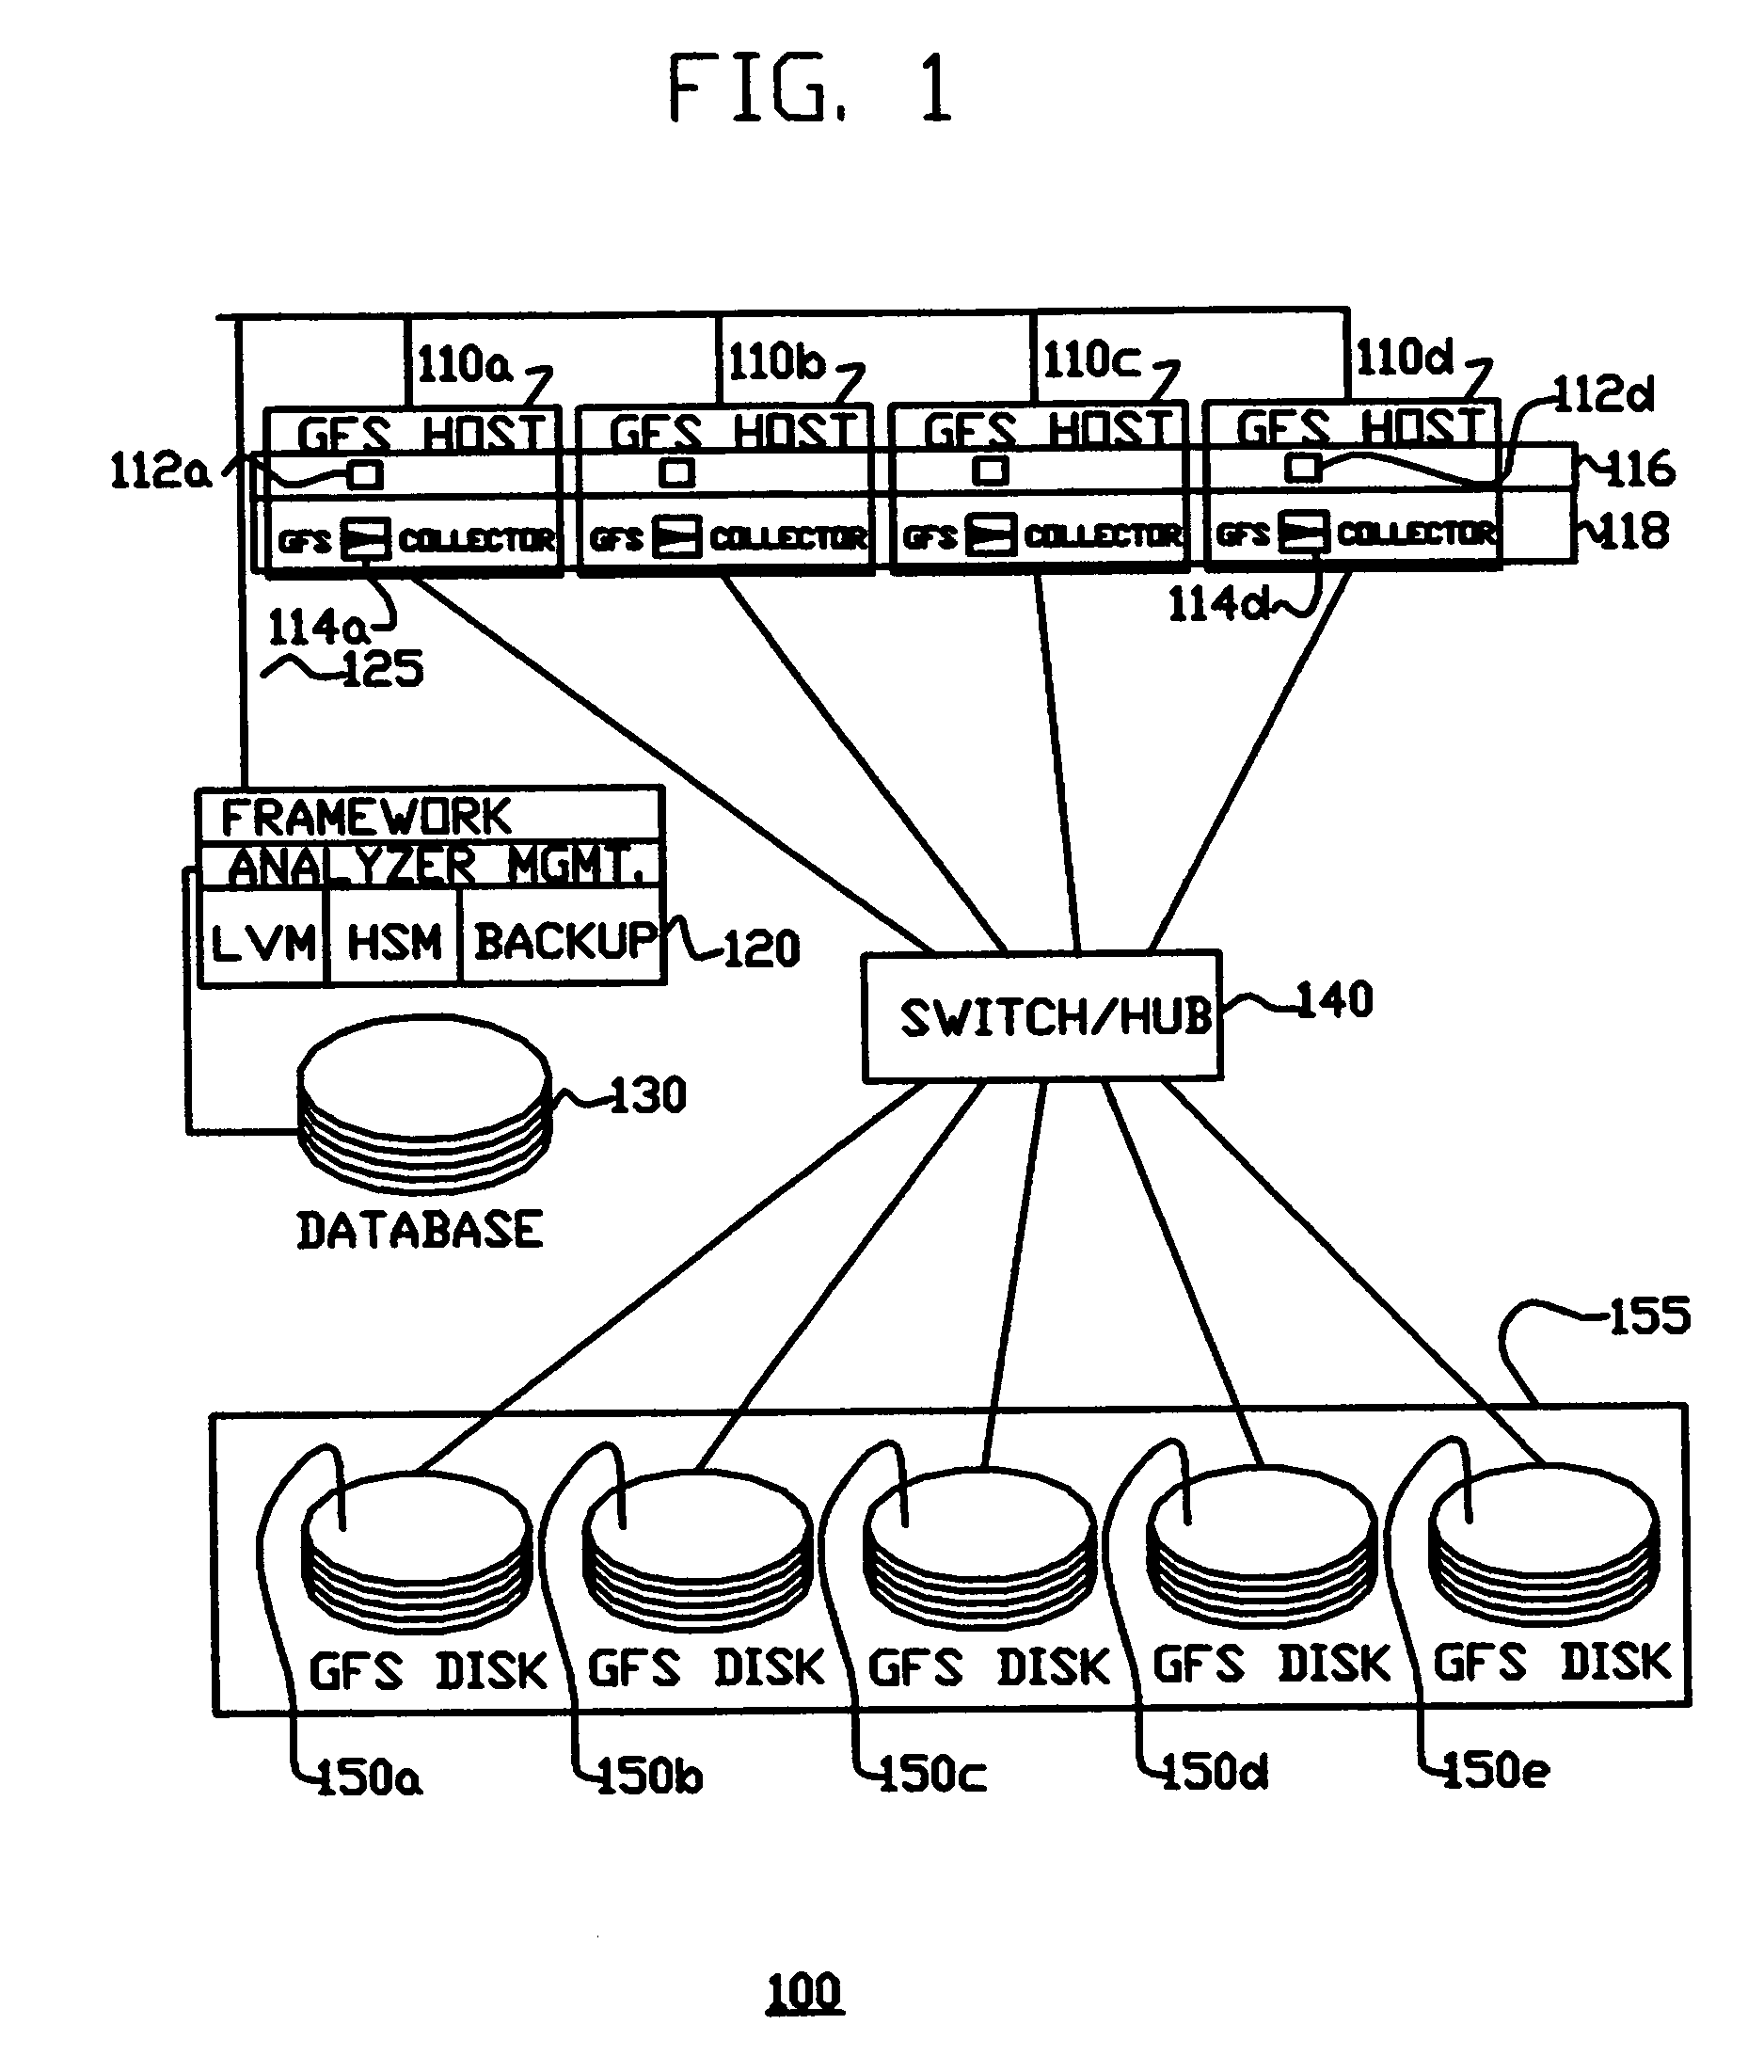 Distributed file system using disk servers, lock servers and file servers